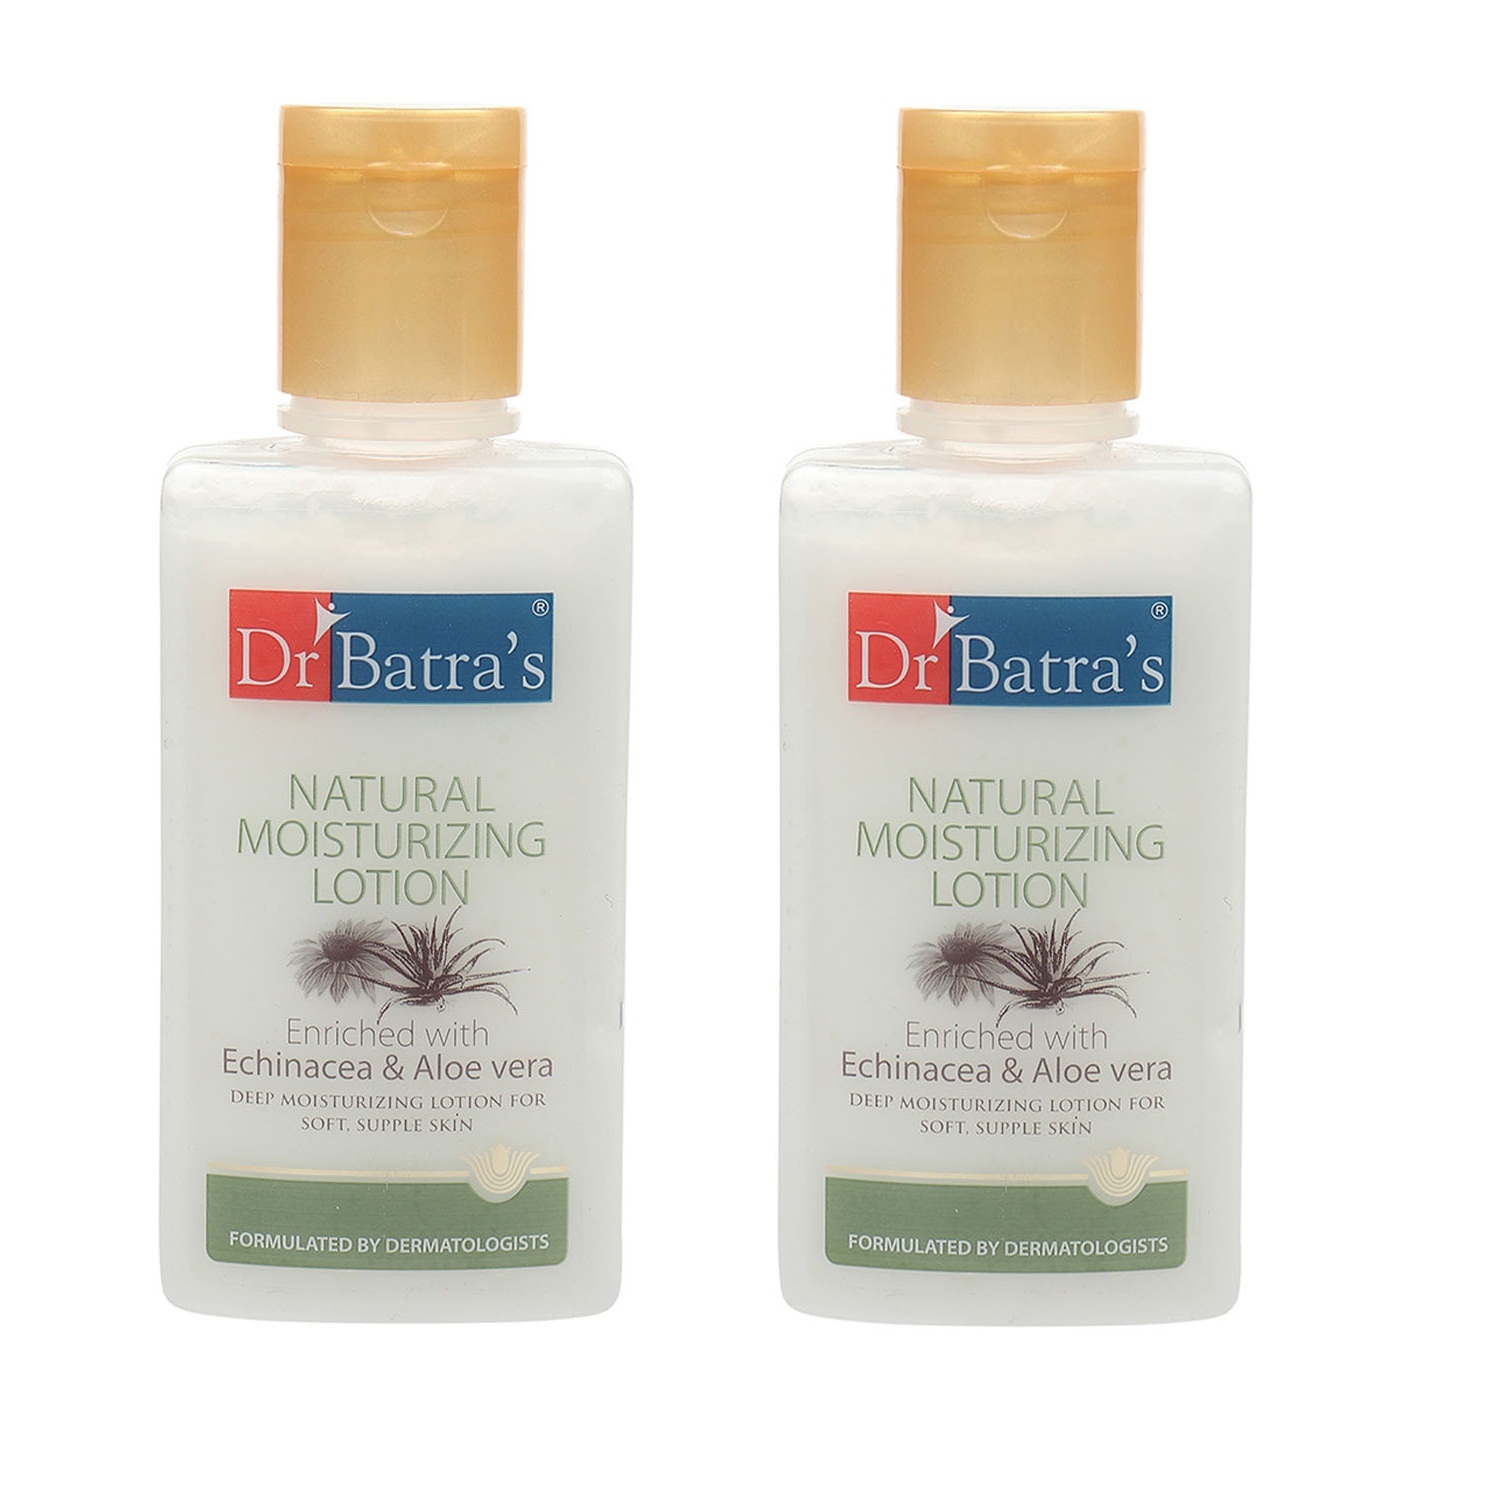 Dr Batra's | Dr Batra's Natural Moisturizing Lotion Enriched With Echinacea Aloe Vera - 100 ml (Pack of 2)